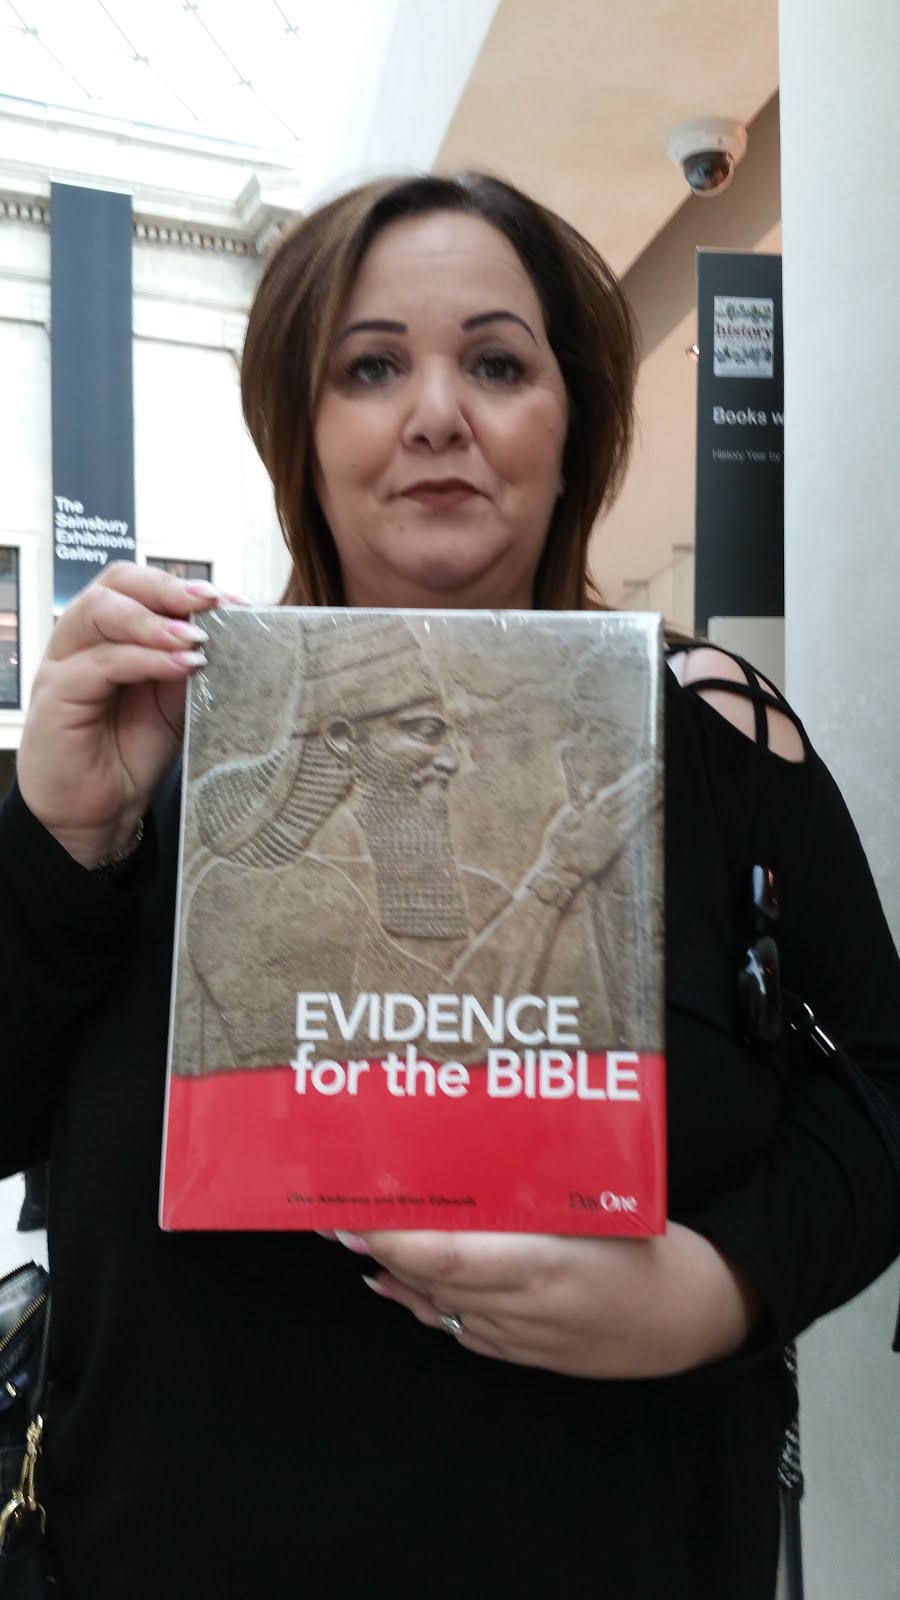 The British Museum has many clay tablets proving the BIBLE.